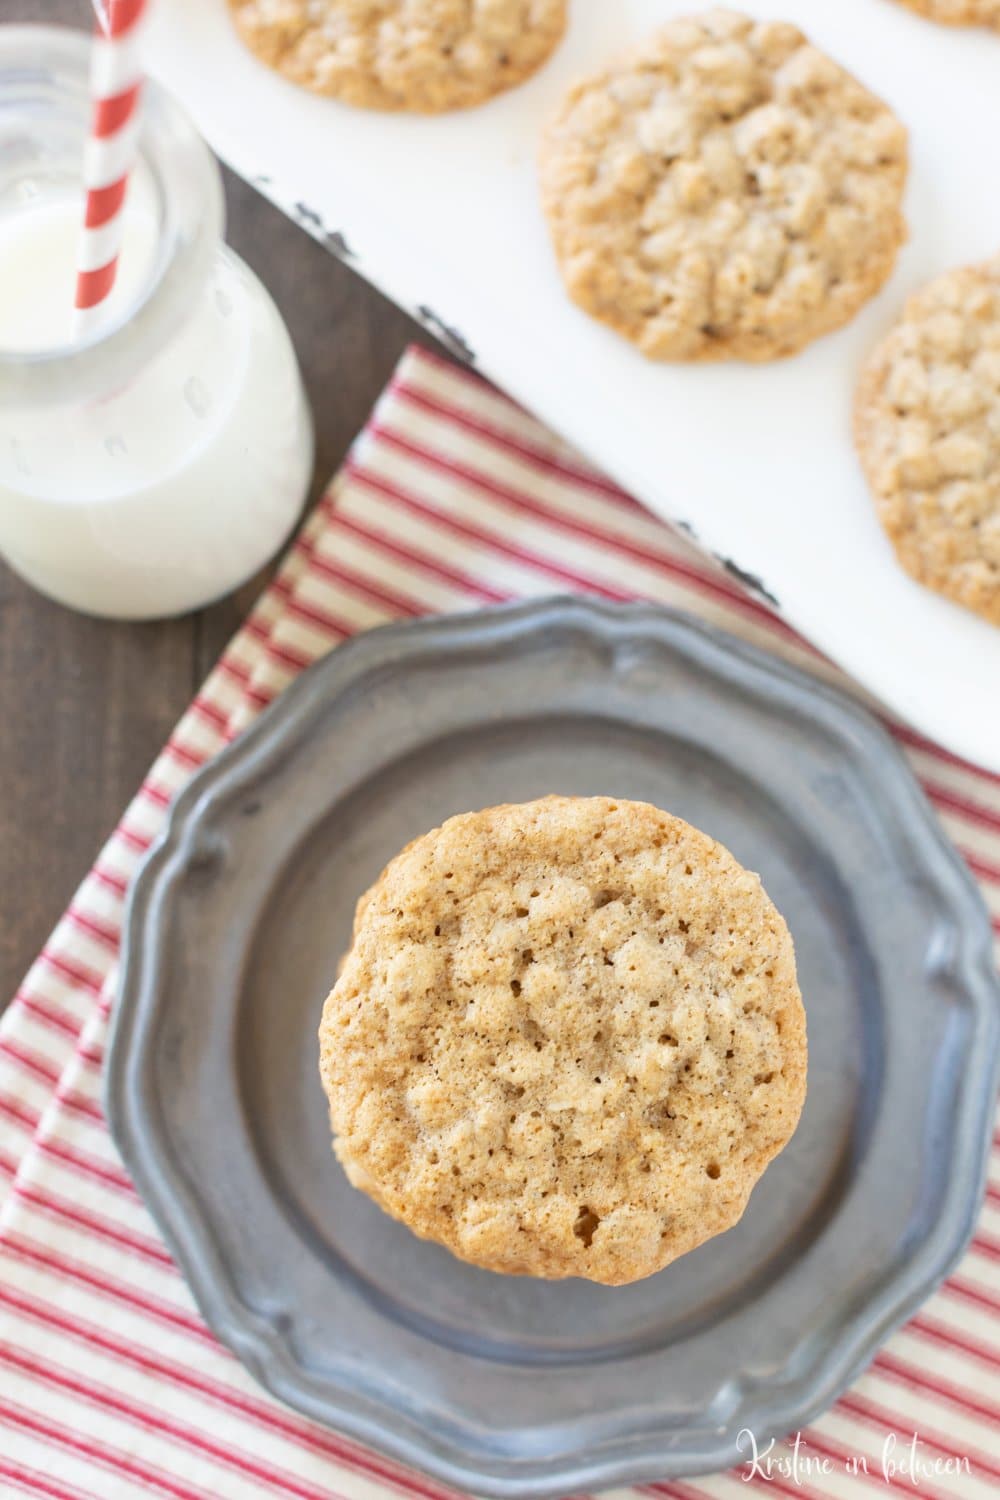 Thin, crispy, chewy, sweet, spicy. That’s how I’d describe these old fashioned oatmeal cookies. They’re pretty much everything you’d expect from a plain oatmeal cookie!